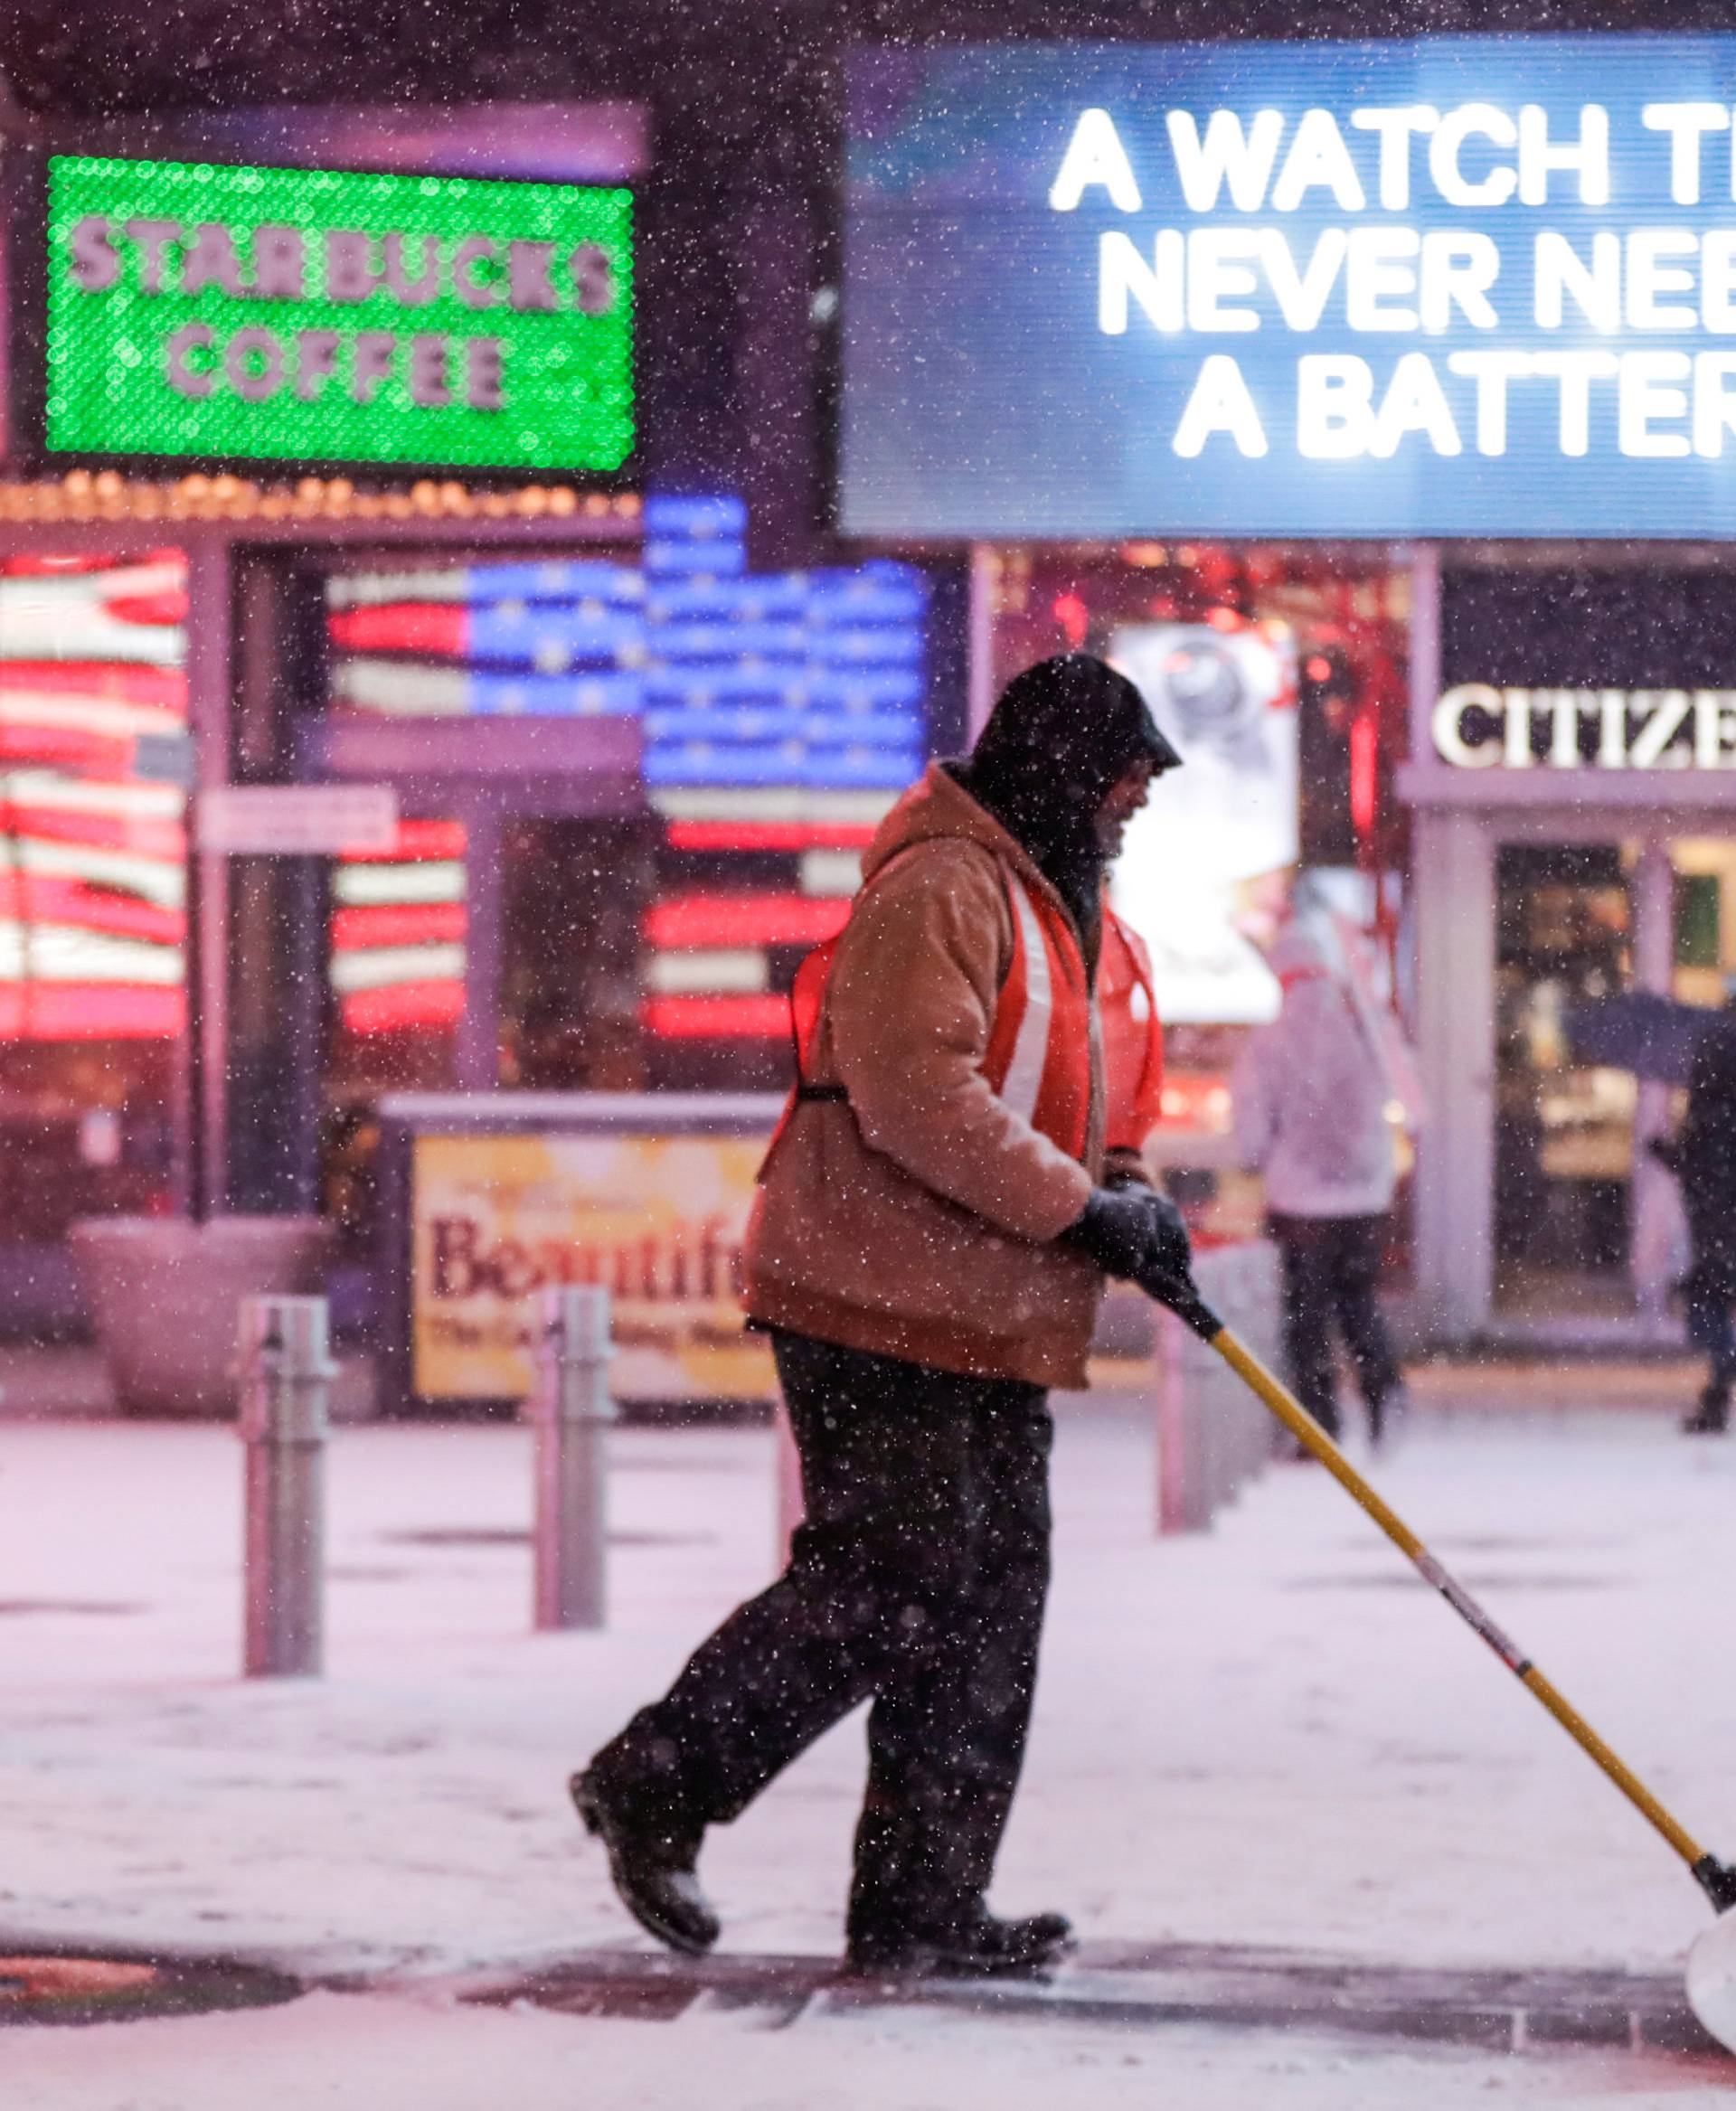 A worker removes snow during a snowstorm in Times Square in Manhattan